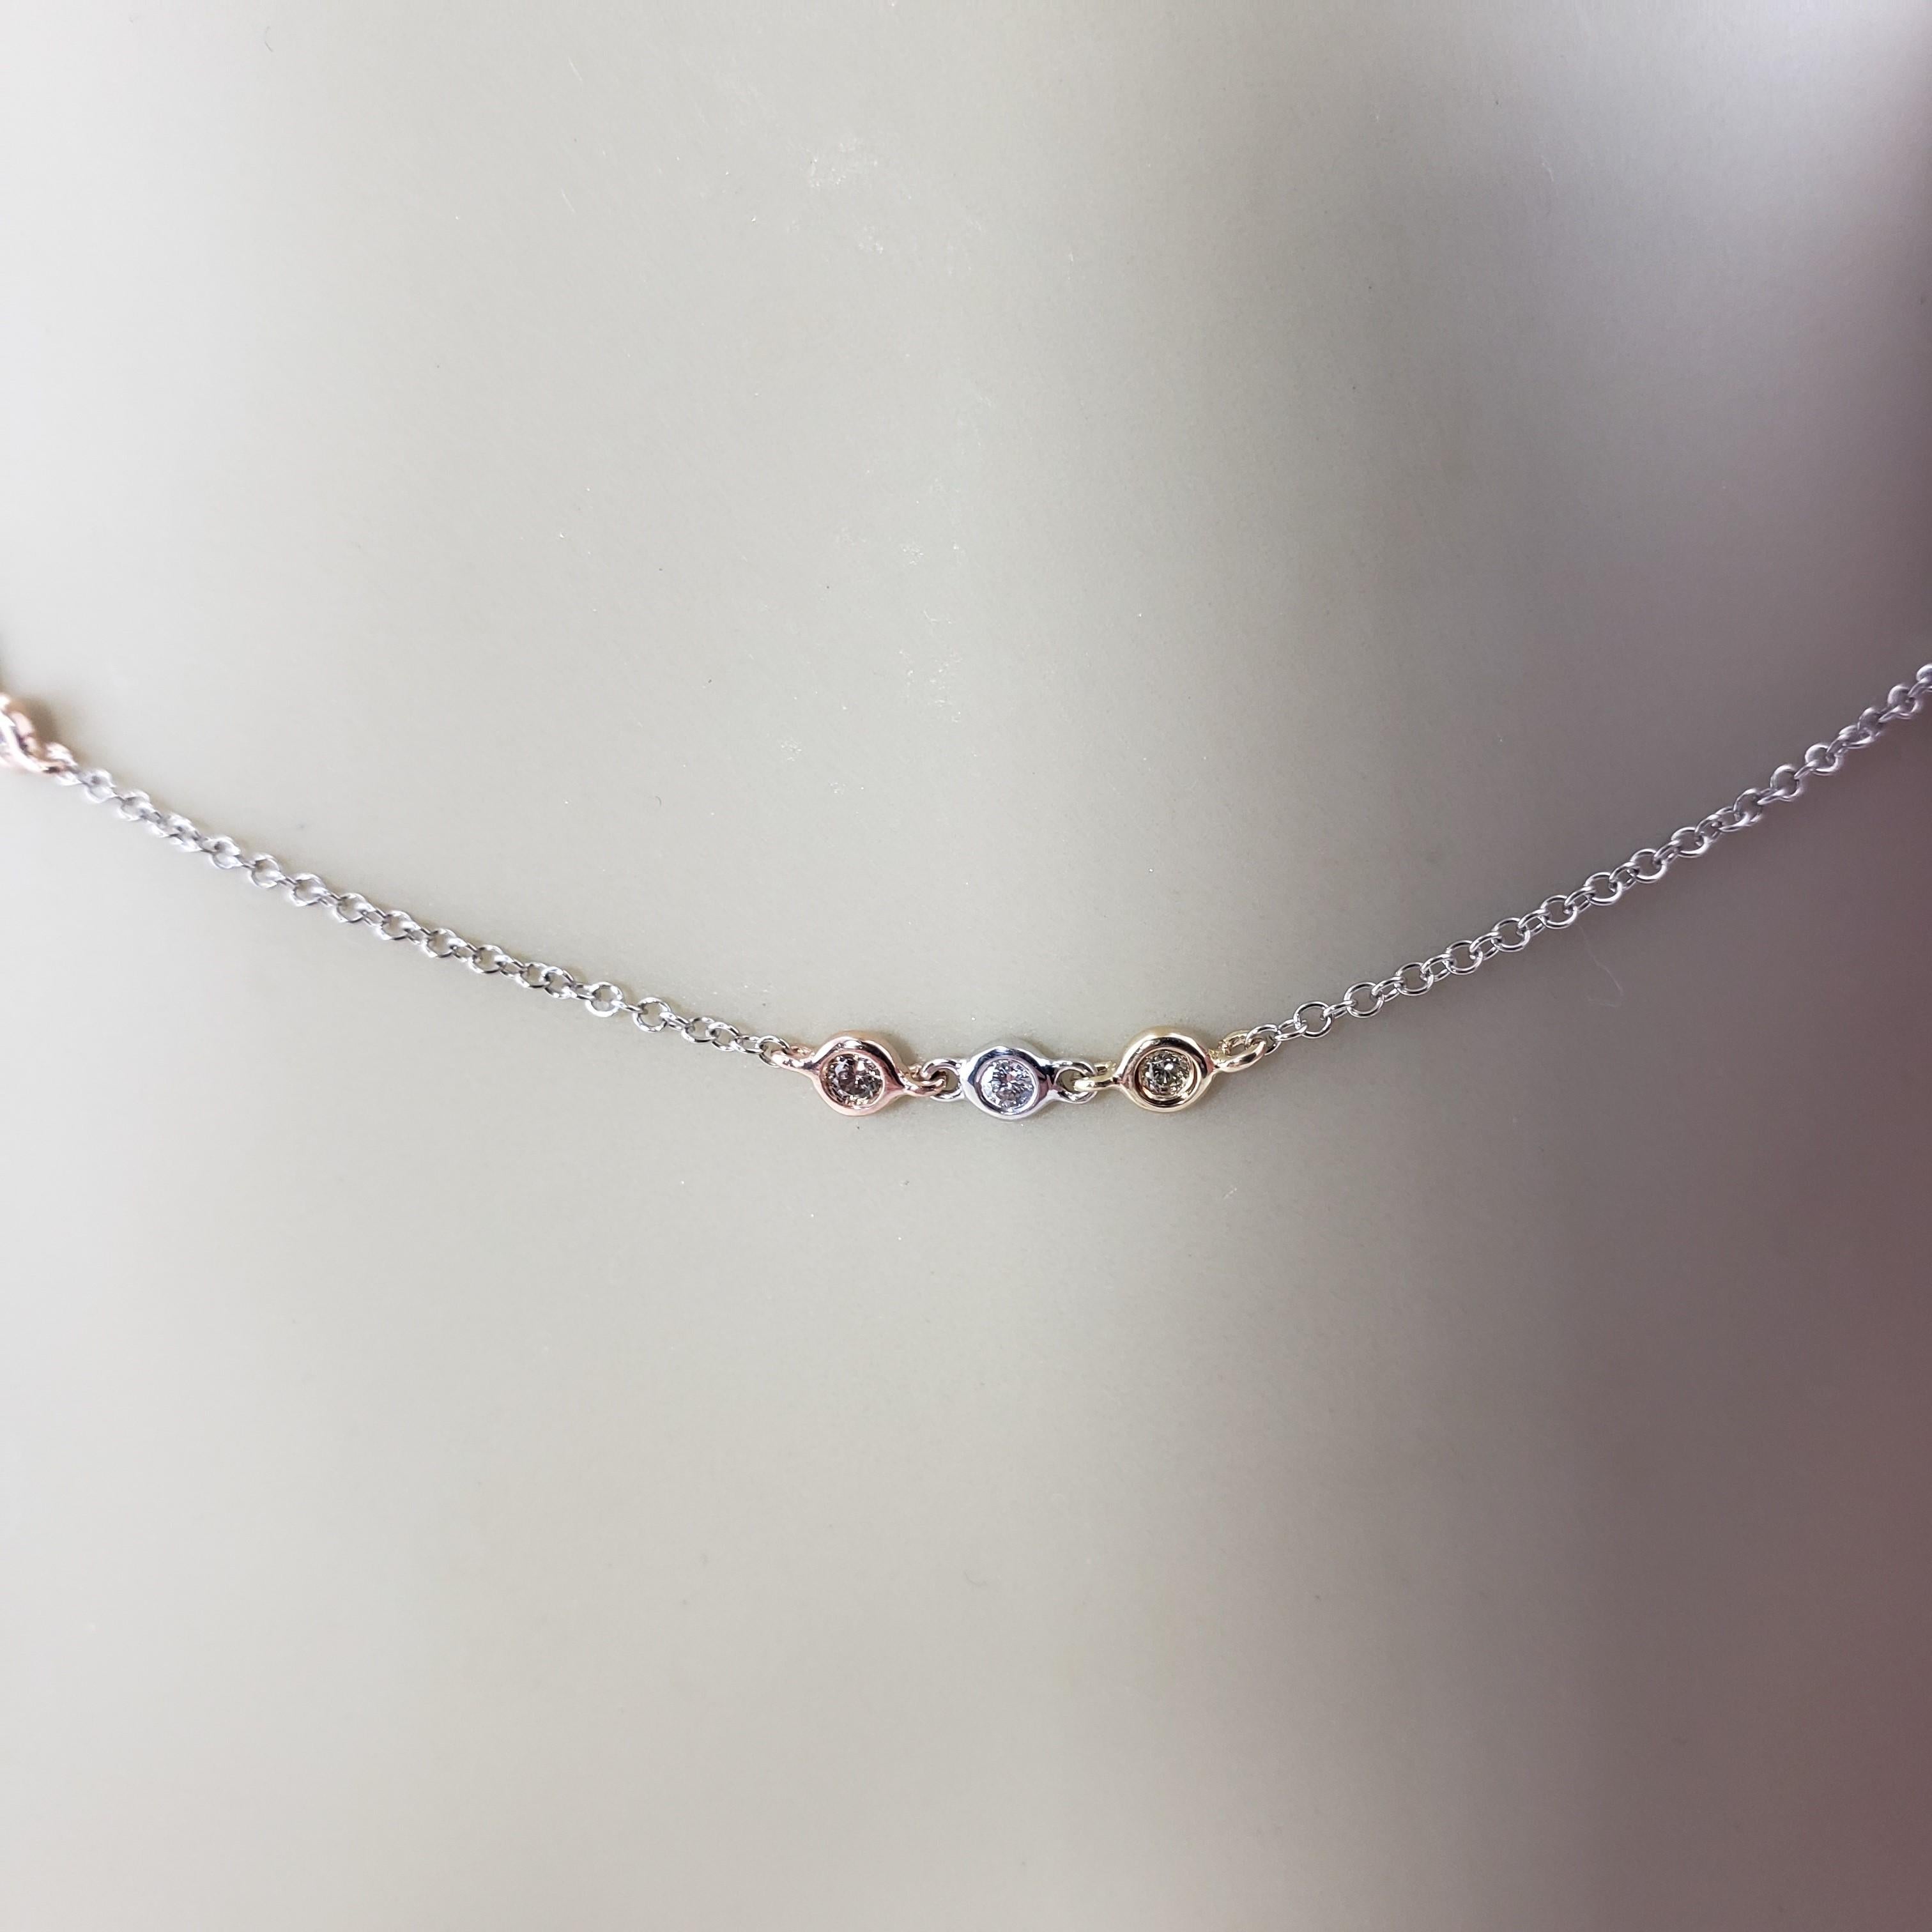 14 Karat White/Yellow/Rose Gold Diamonds by the Yard Necklace For Sale 2